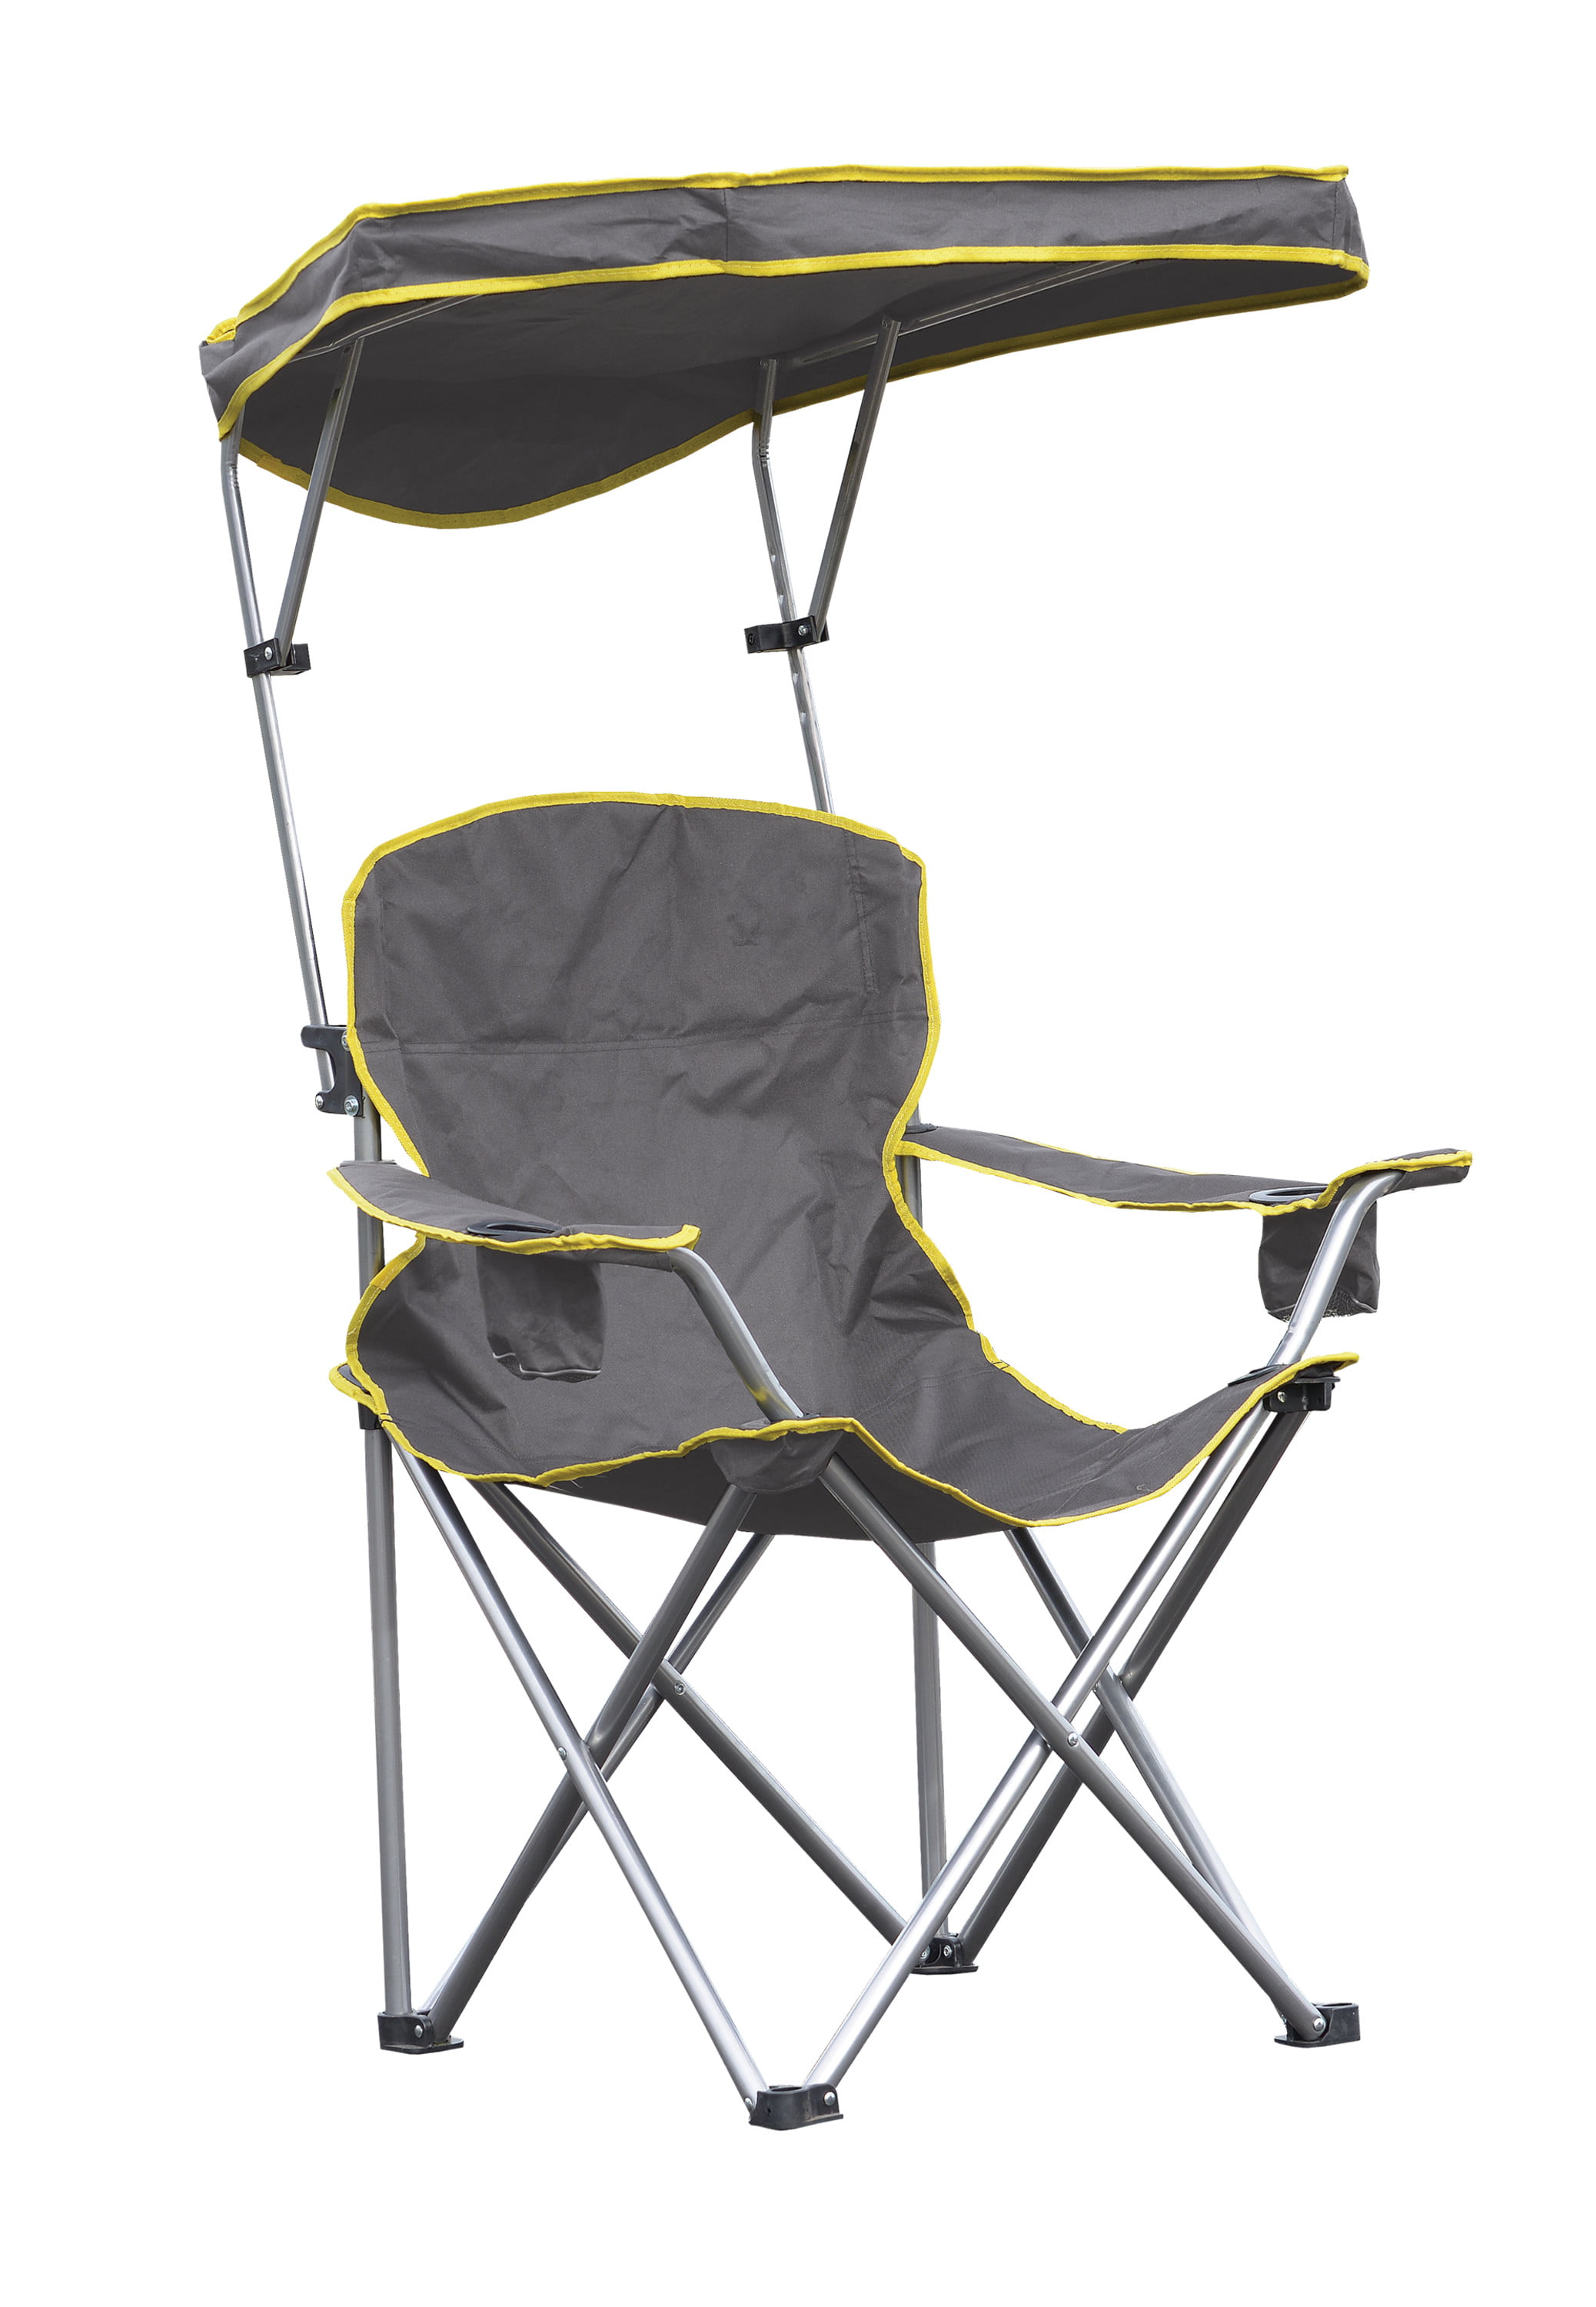 Black Fishing Camping Beach Camping Beech Chair Leisure Back Suitable for Travel Outdoor Folding Solid Wood Stool Chair Courtyard